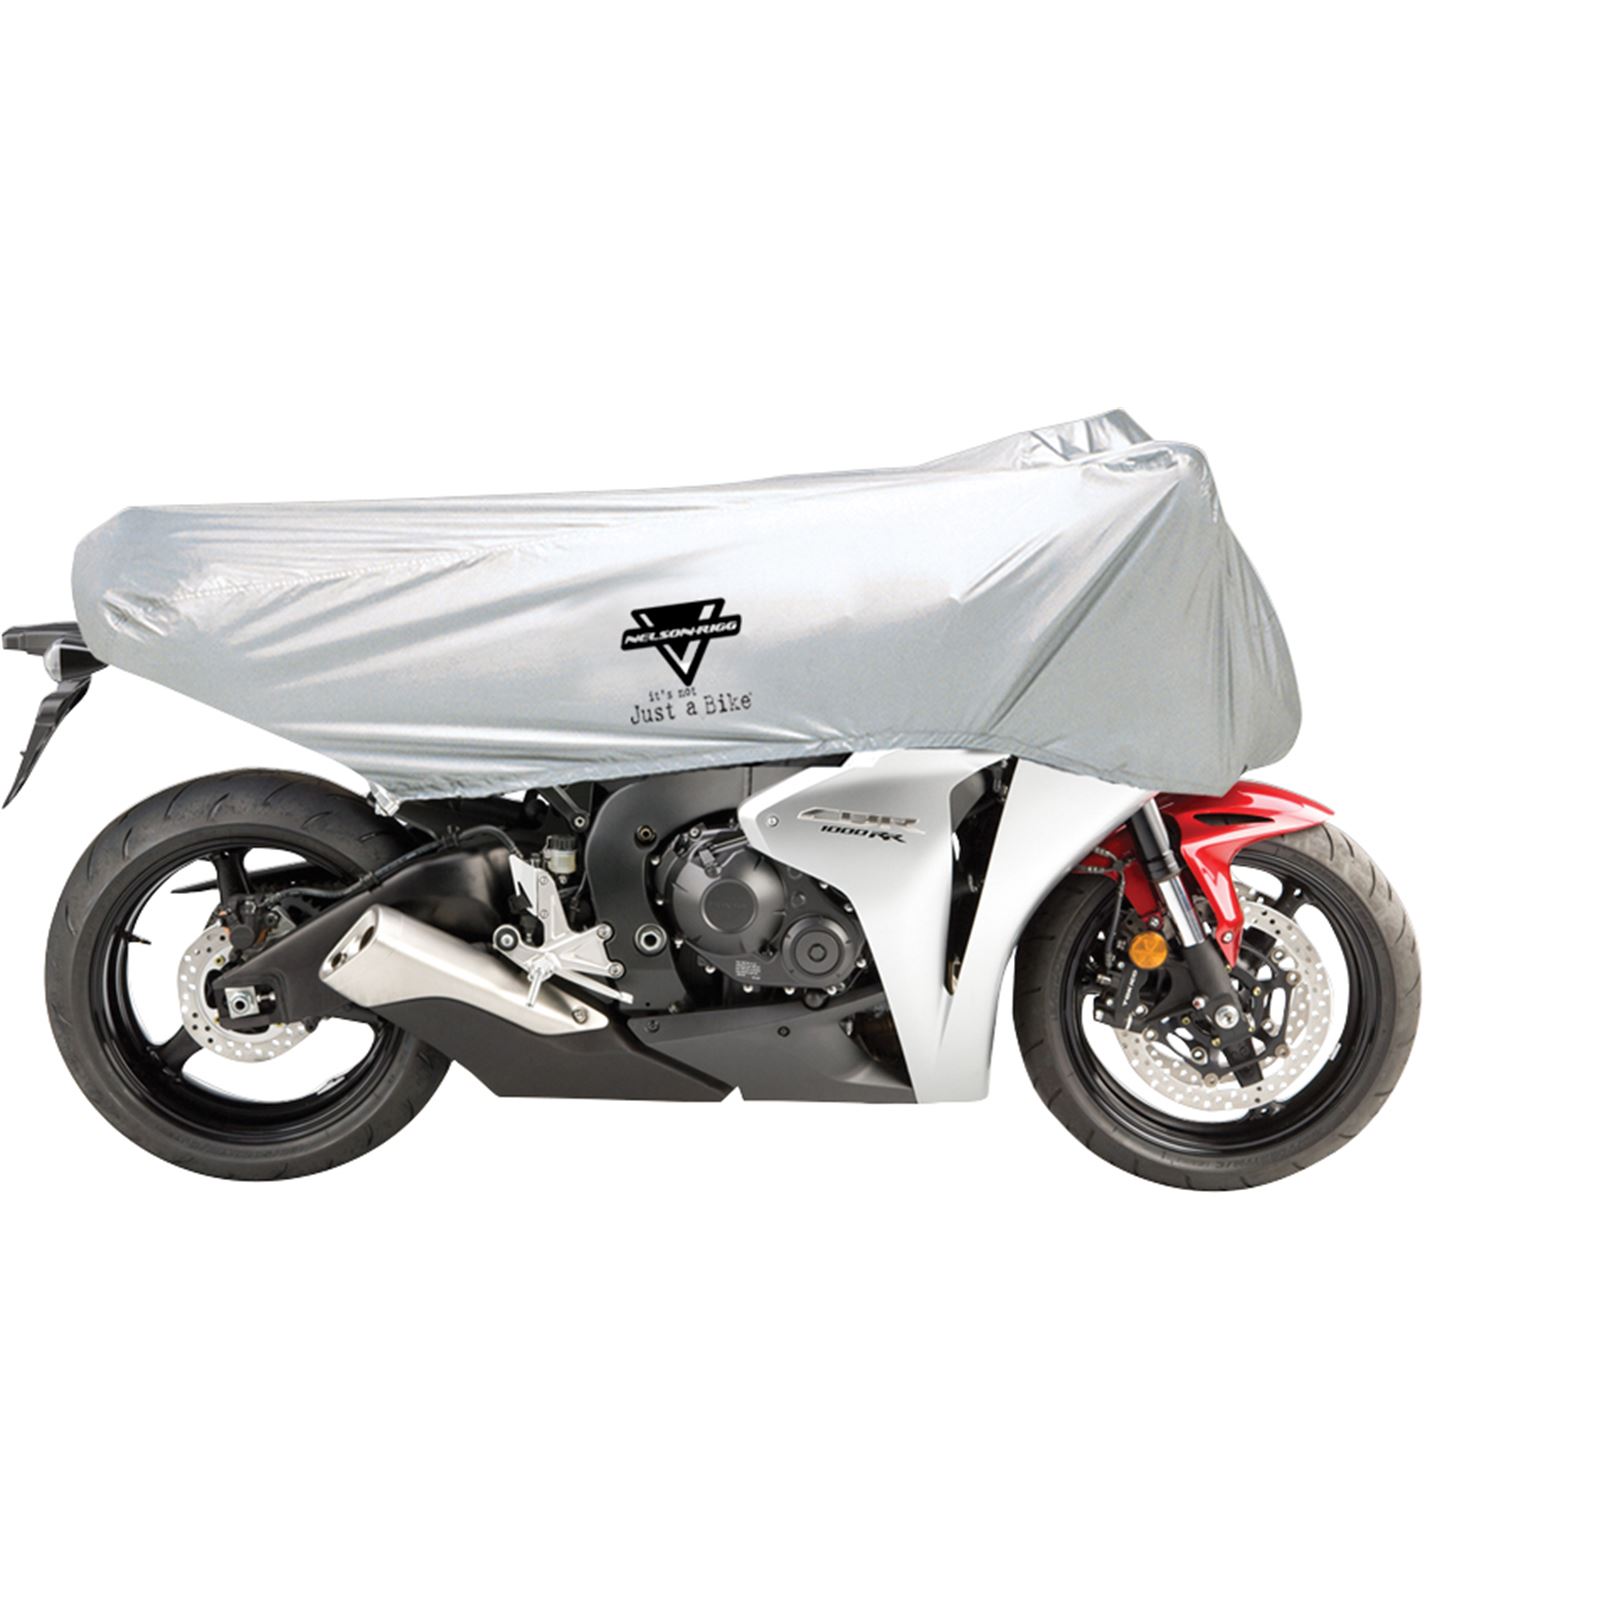 Nelson-Rigg UV2000 Cycle Cover